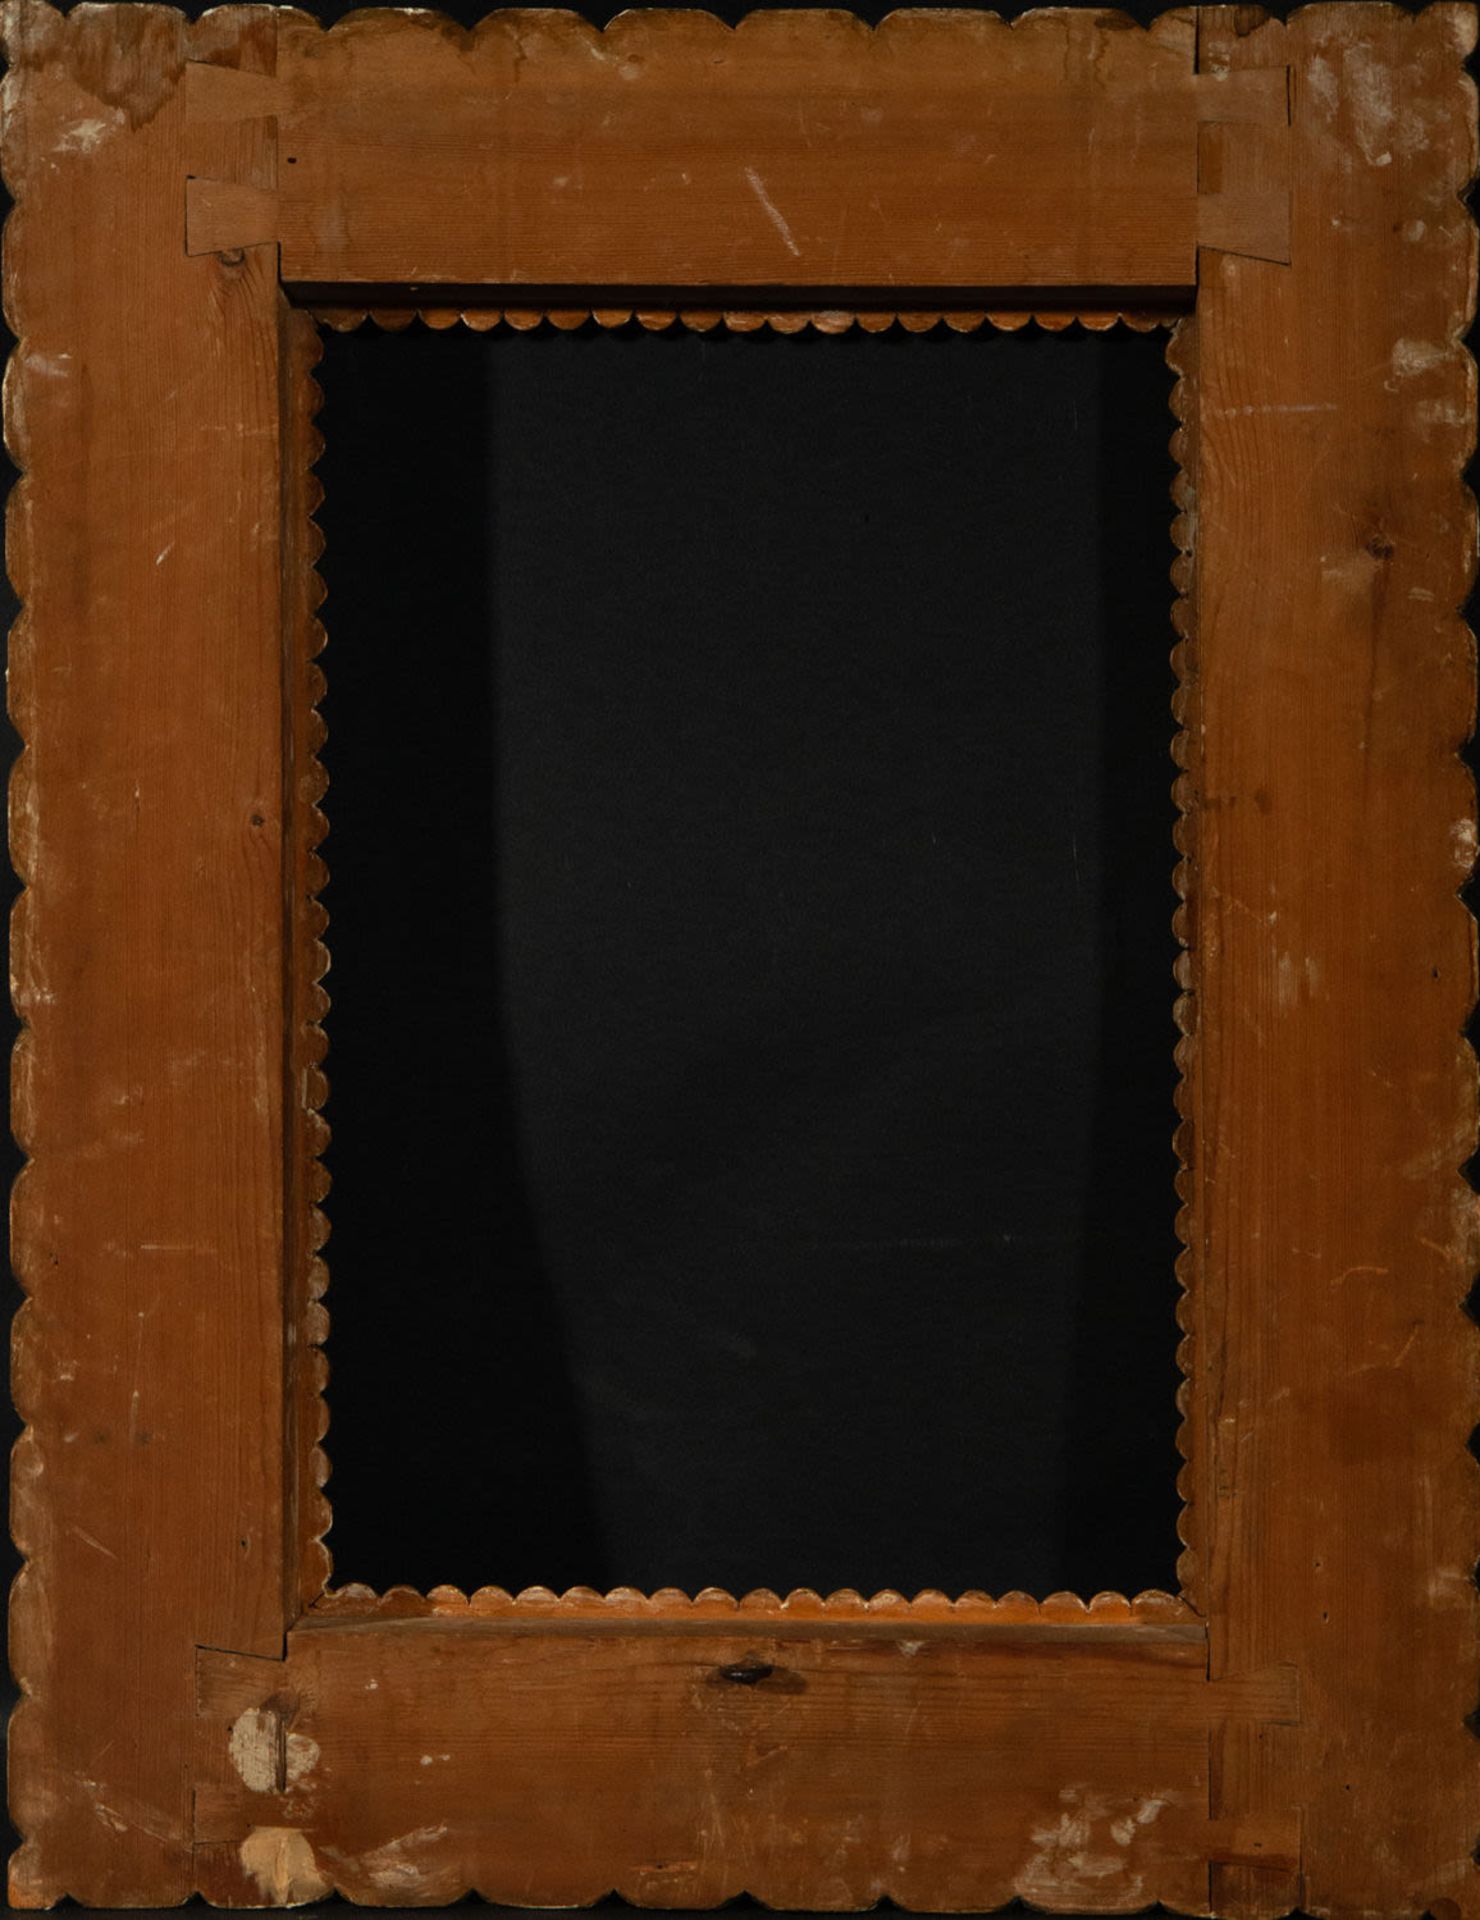 Baroque style frame in gilded wood, 19th century - Image 2 of 2